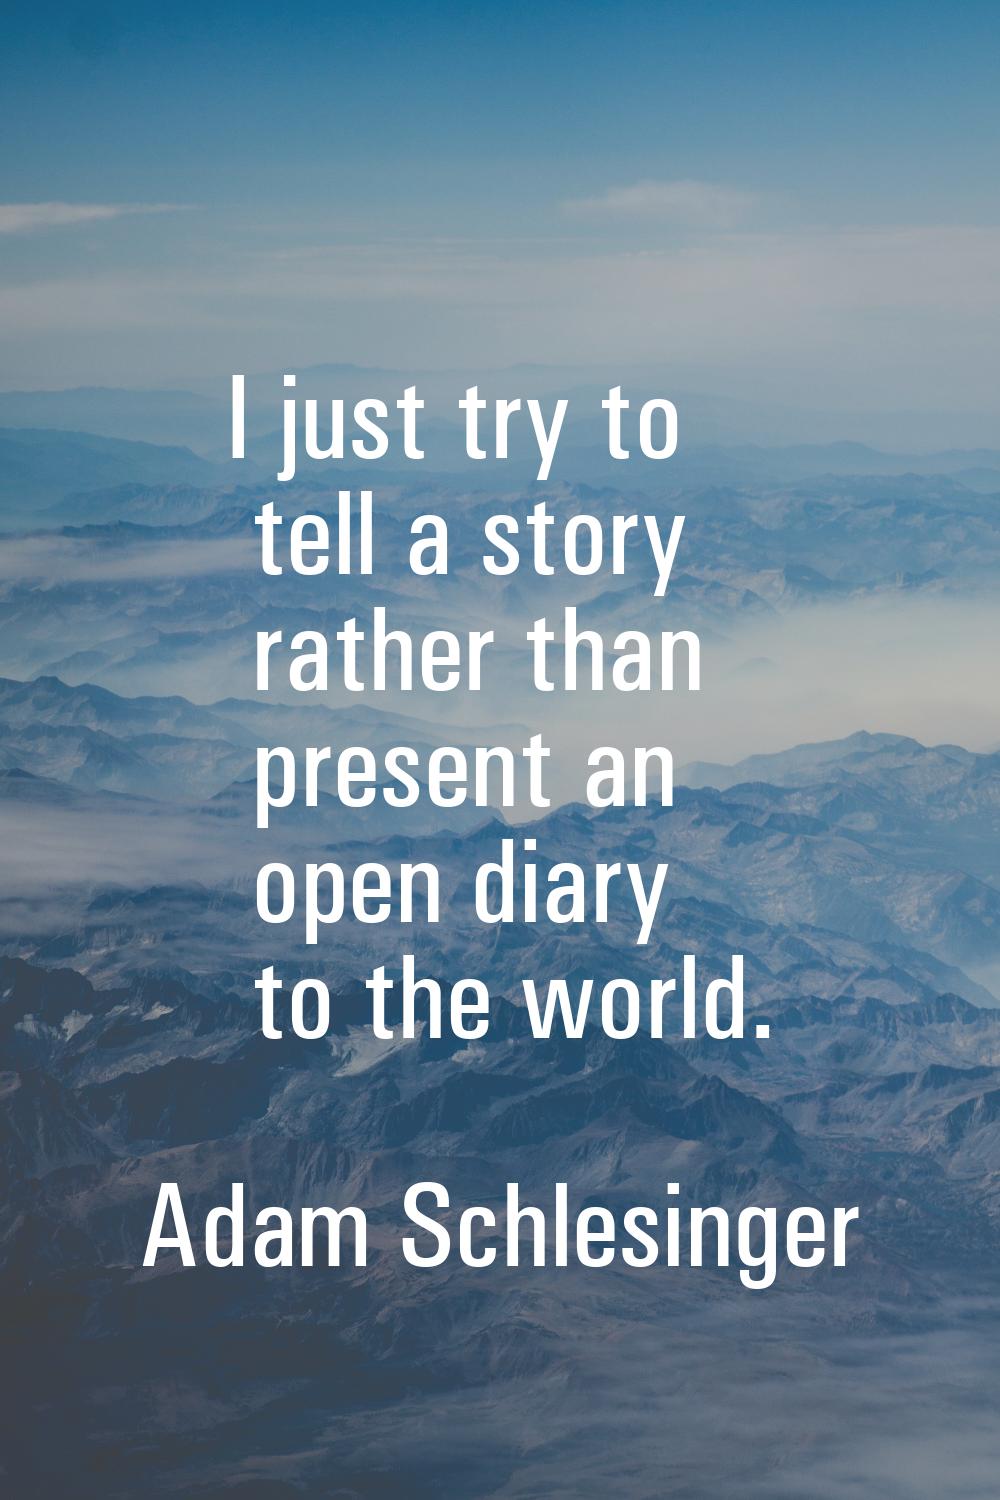 I just try to tell a story rather than present an open diary to the world.